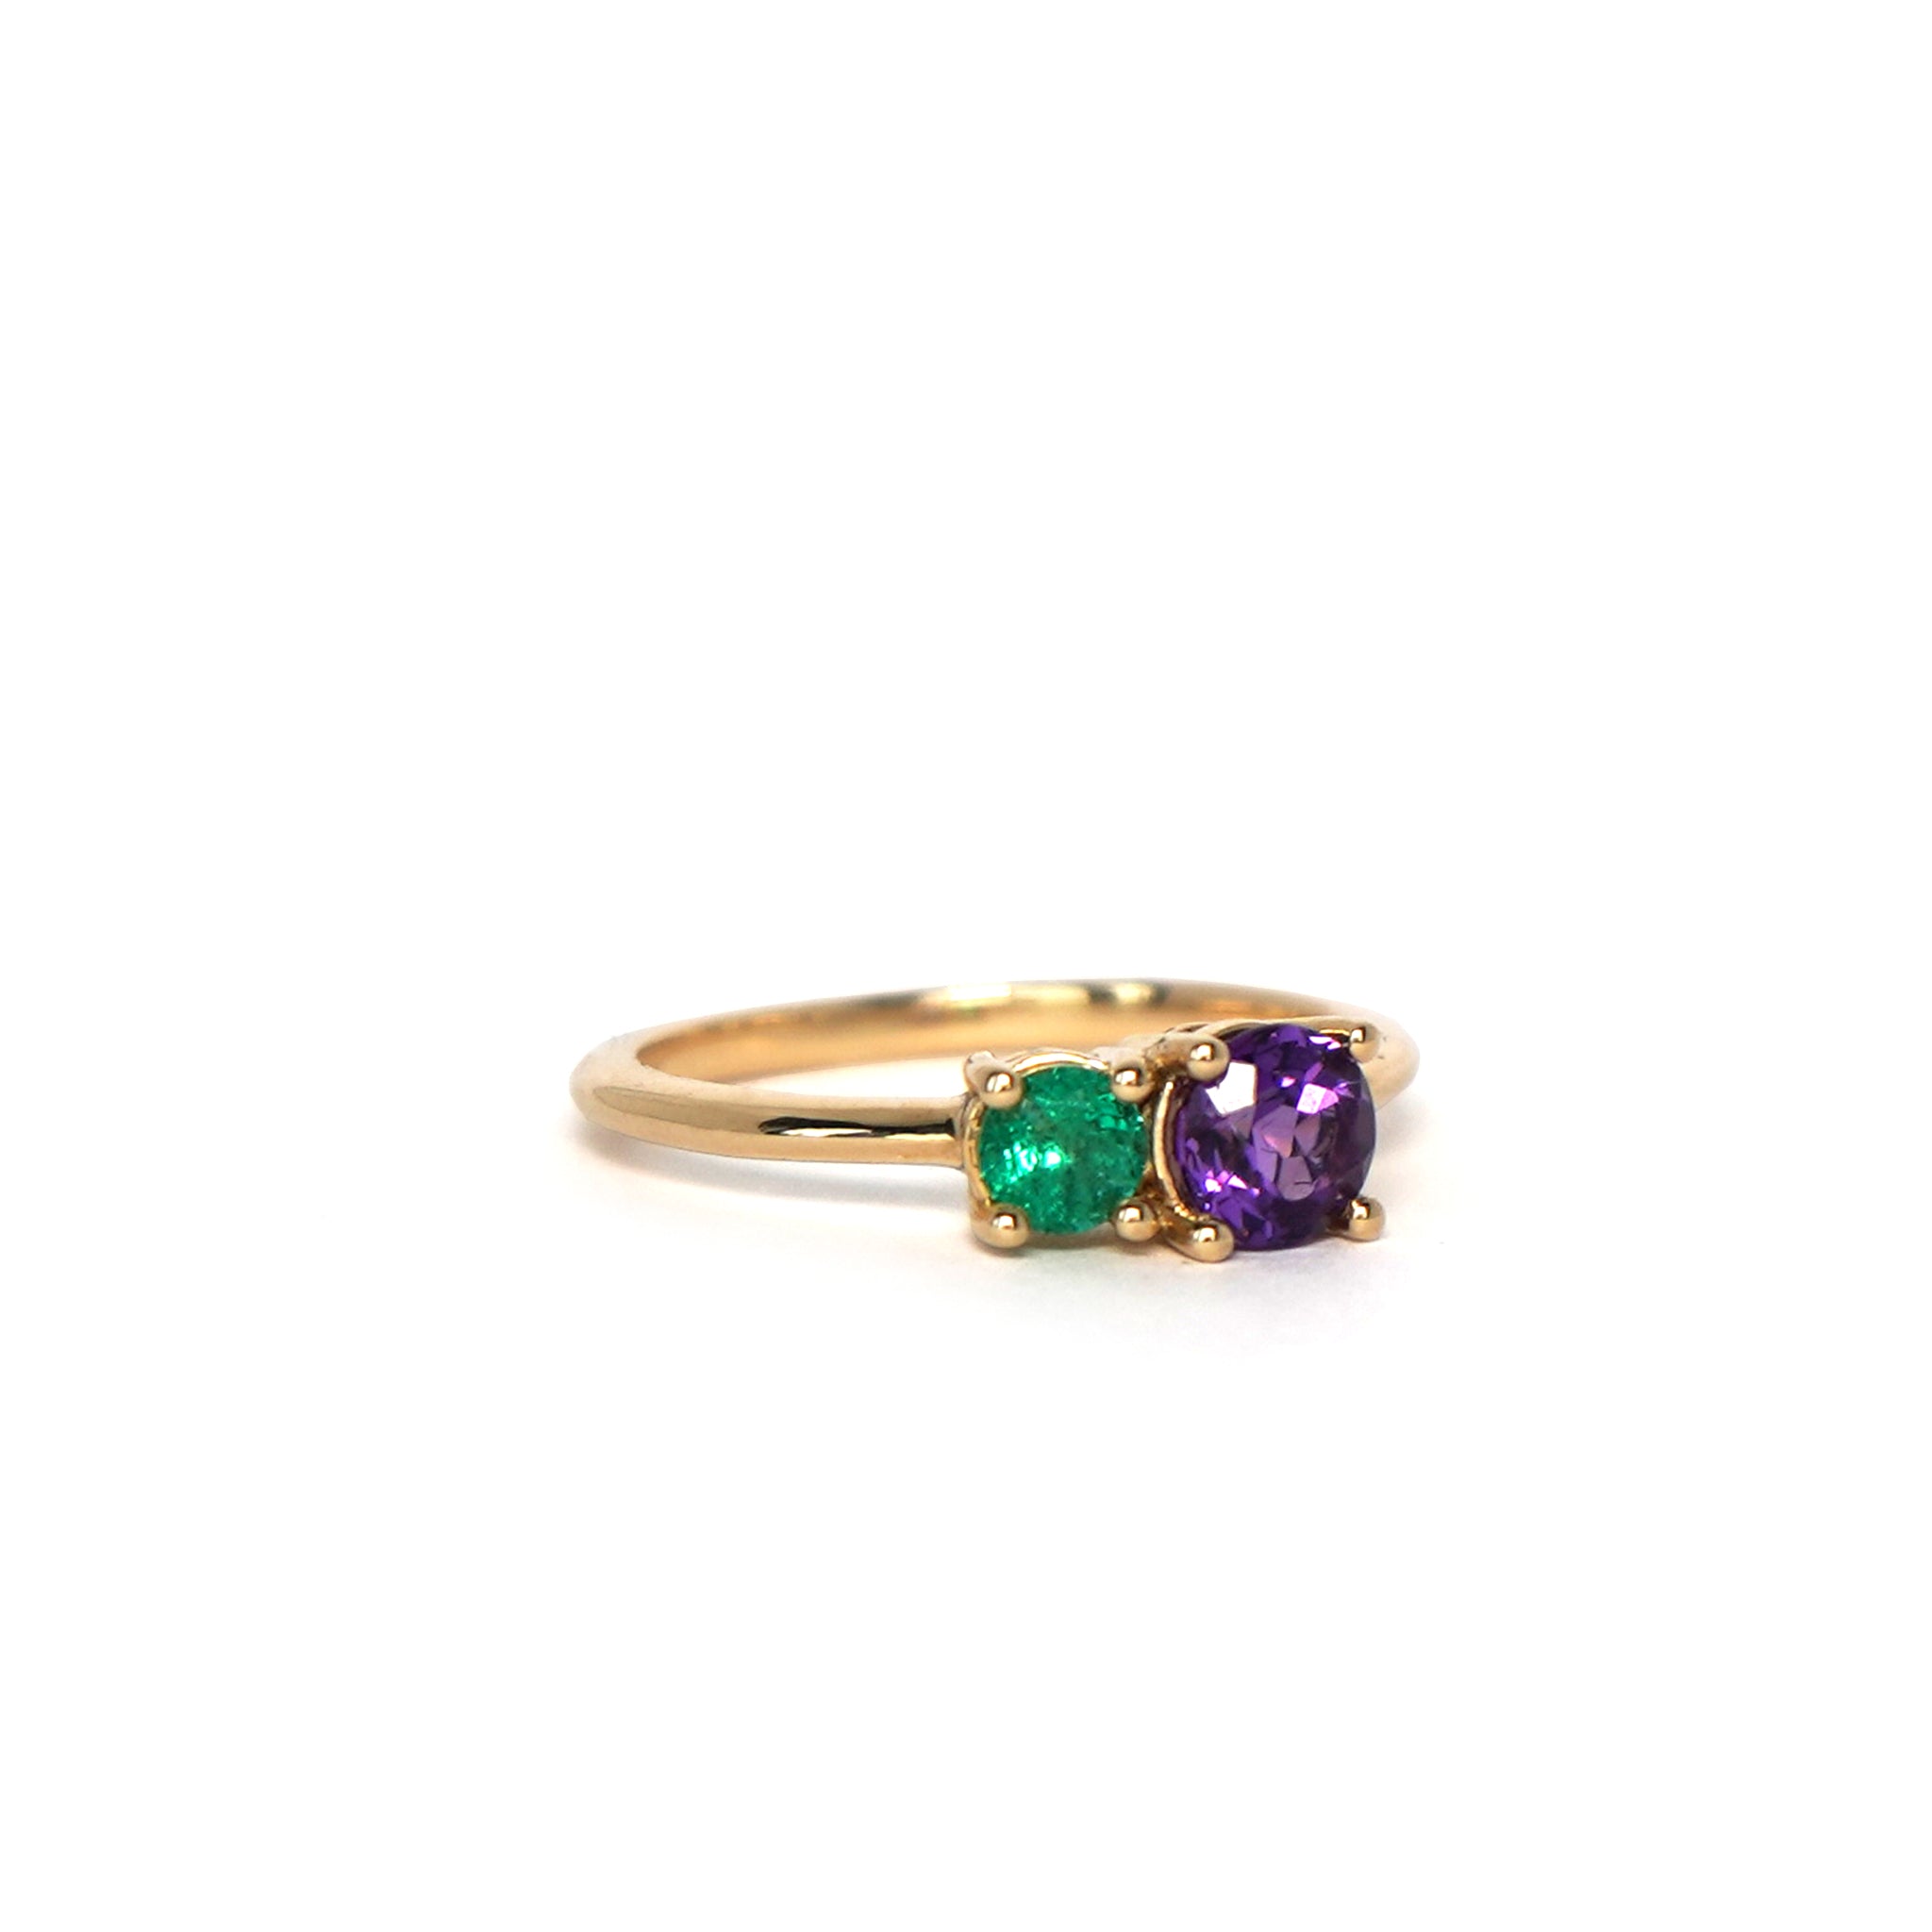 Lico Jewelry's Beetle Grape ring featuring a 0.40 ct amethyst and 0.26 ct Colombian emerald in solid 14k yellow gold